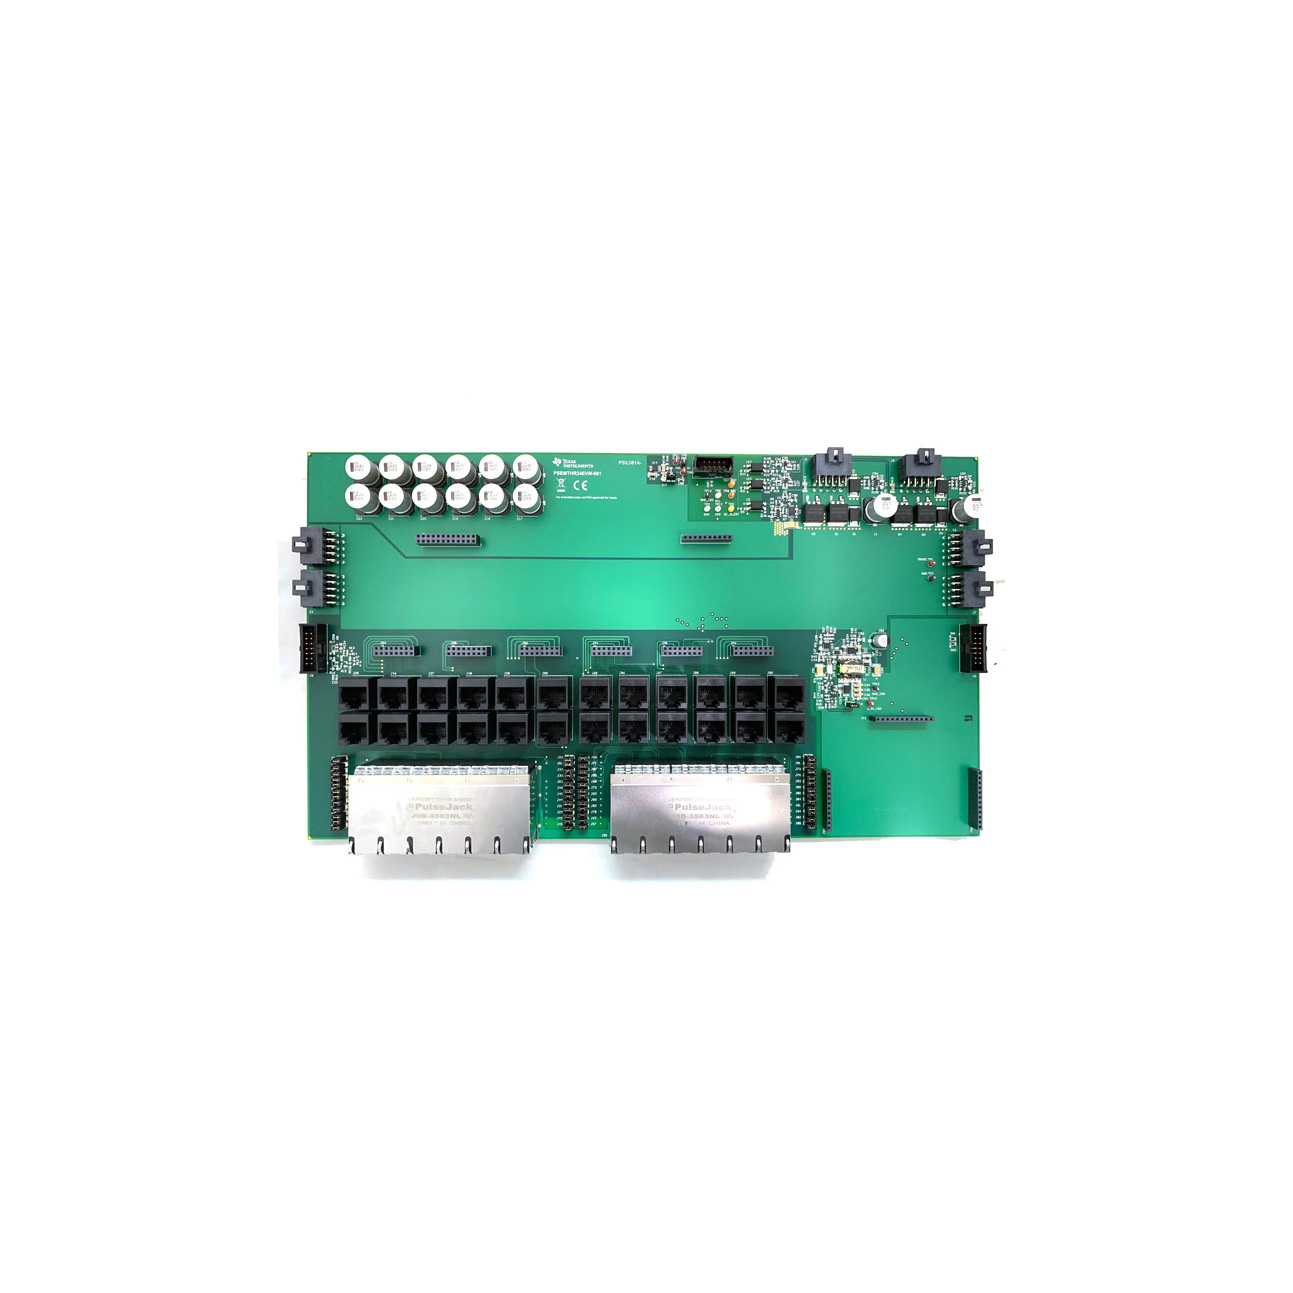 the part number is PSEMTHR24EVM-081